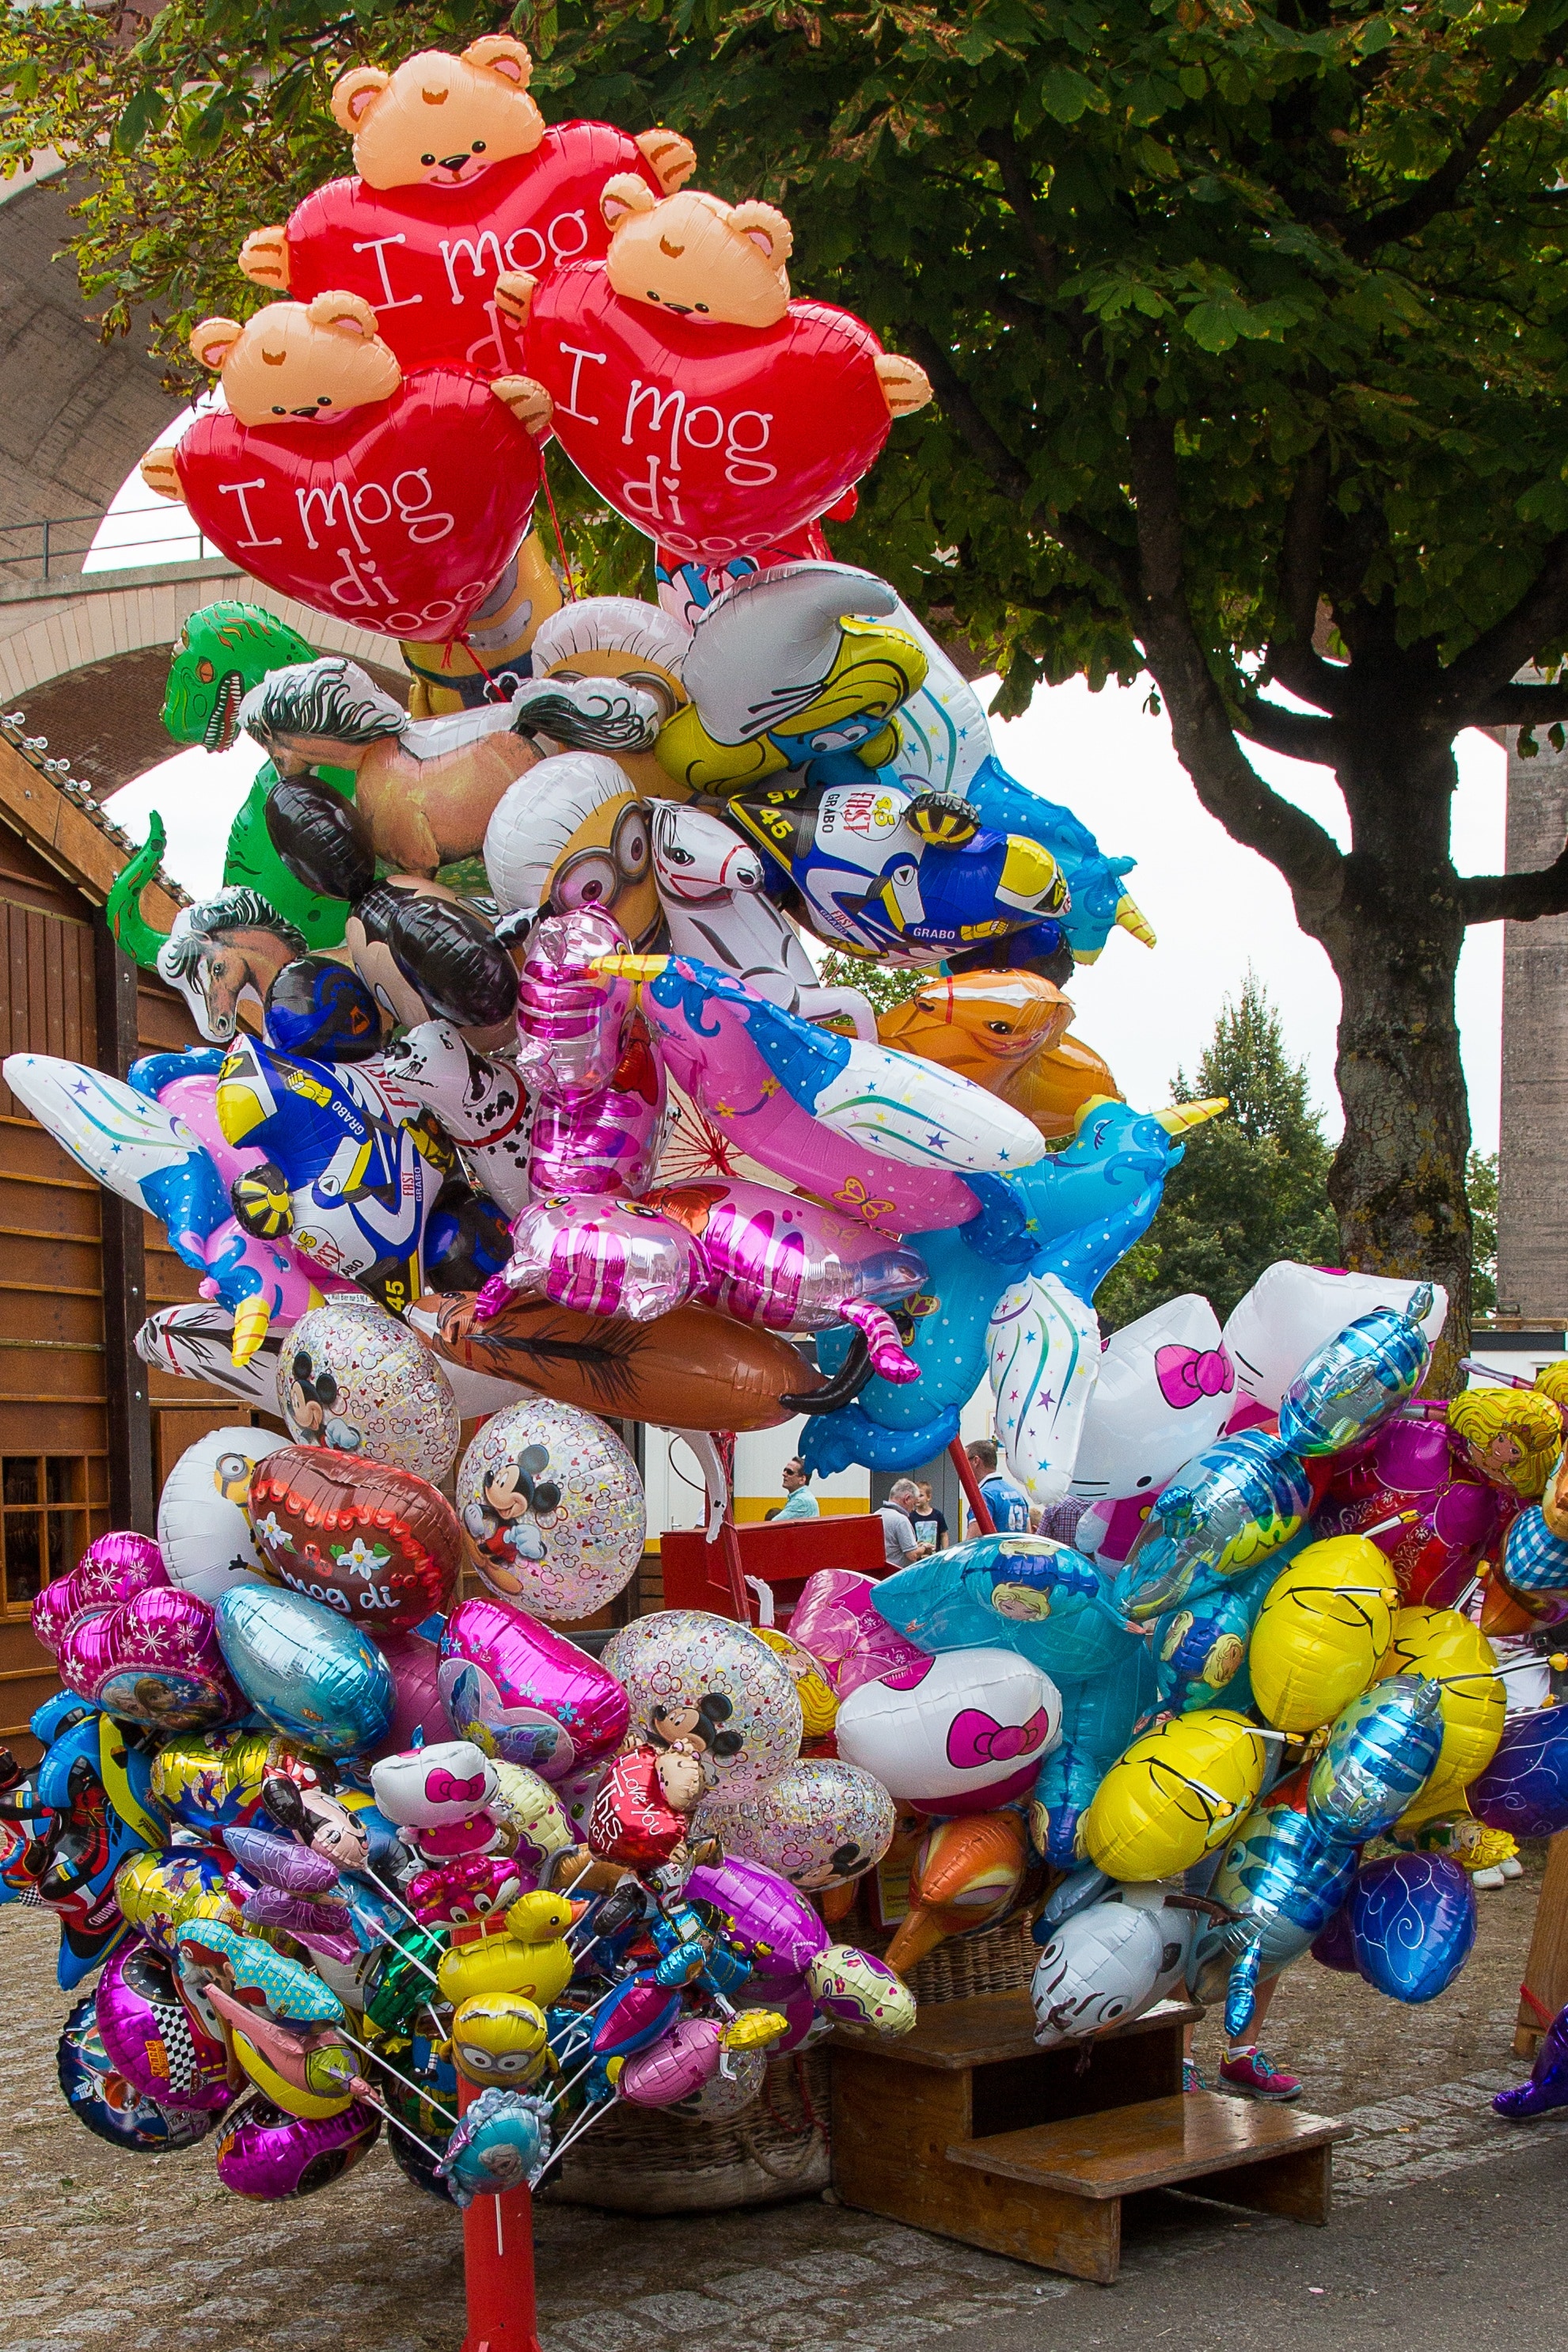 assorted balloons near green leaf tree during daytime